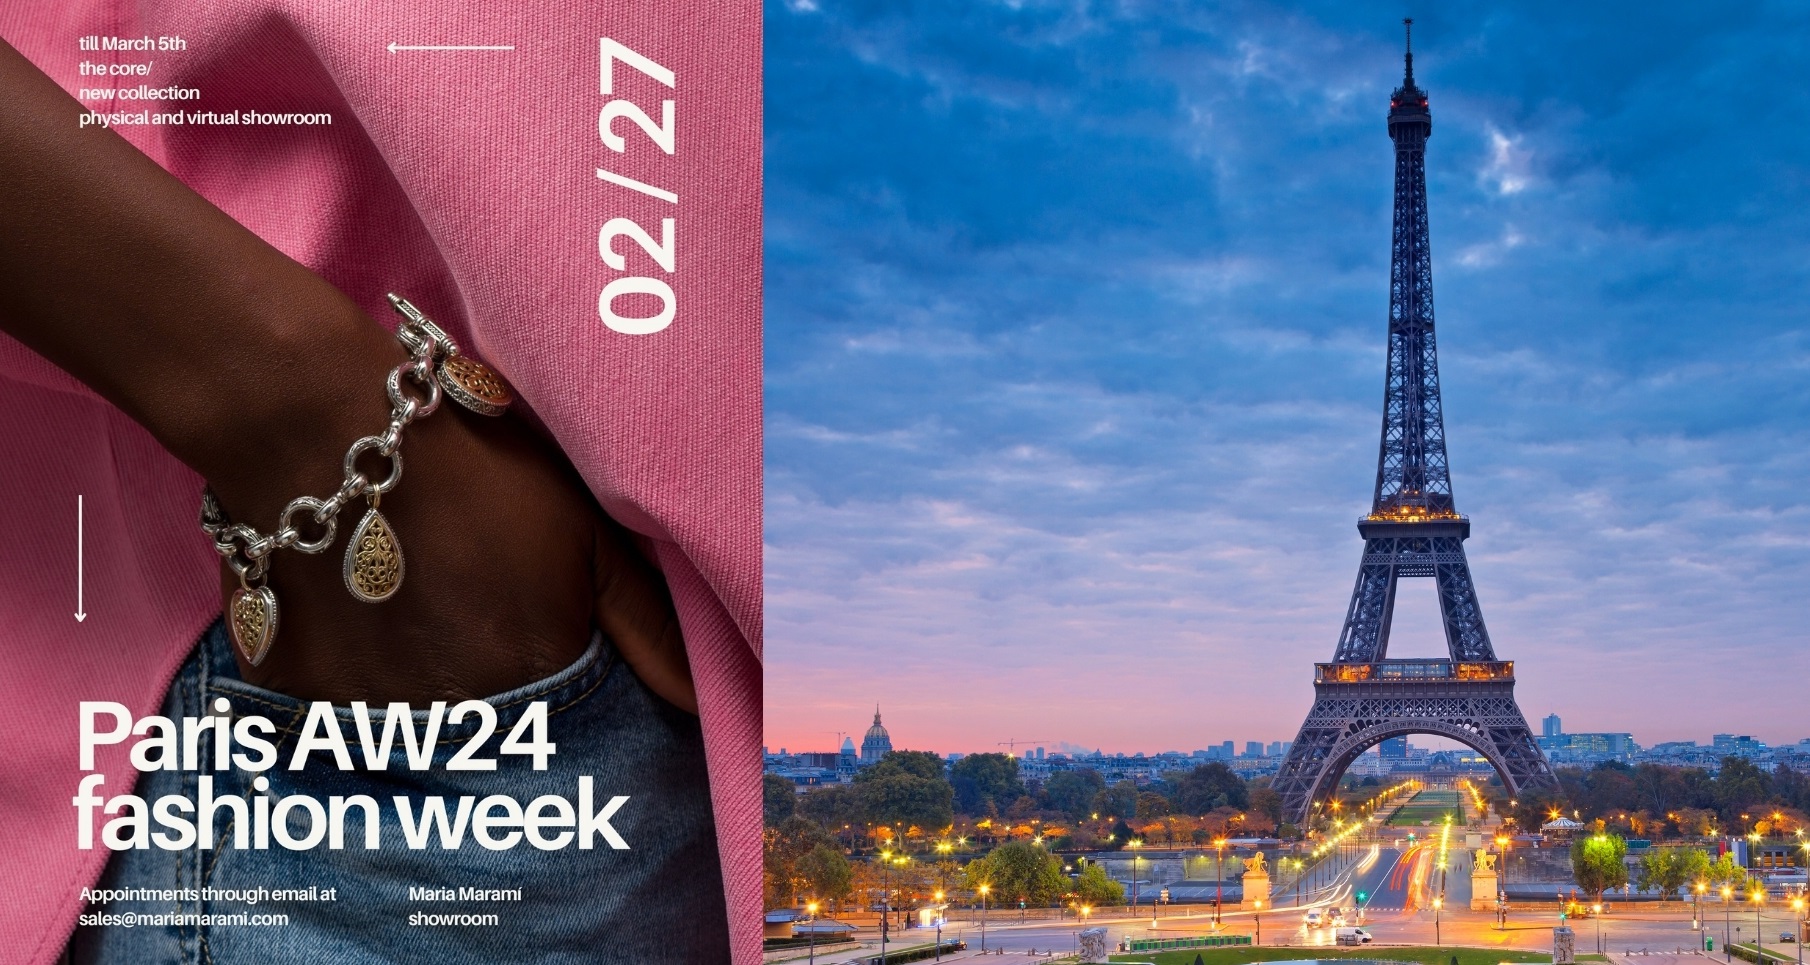 Gerochristo Jewelry is getting ready for the Paris Fashion Week AW24, from 27th February to 5th March 2024. Book an appointment today!